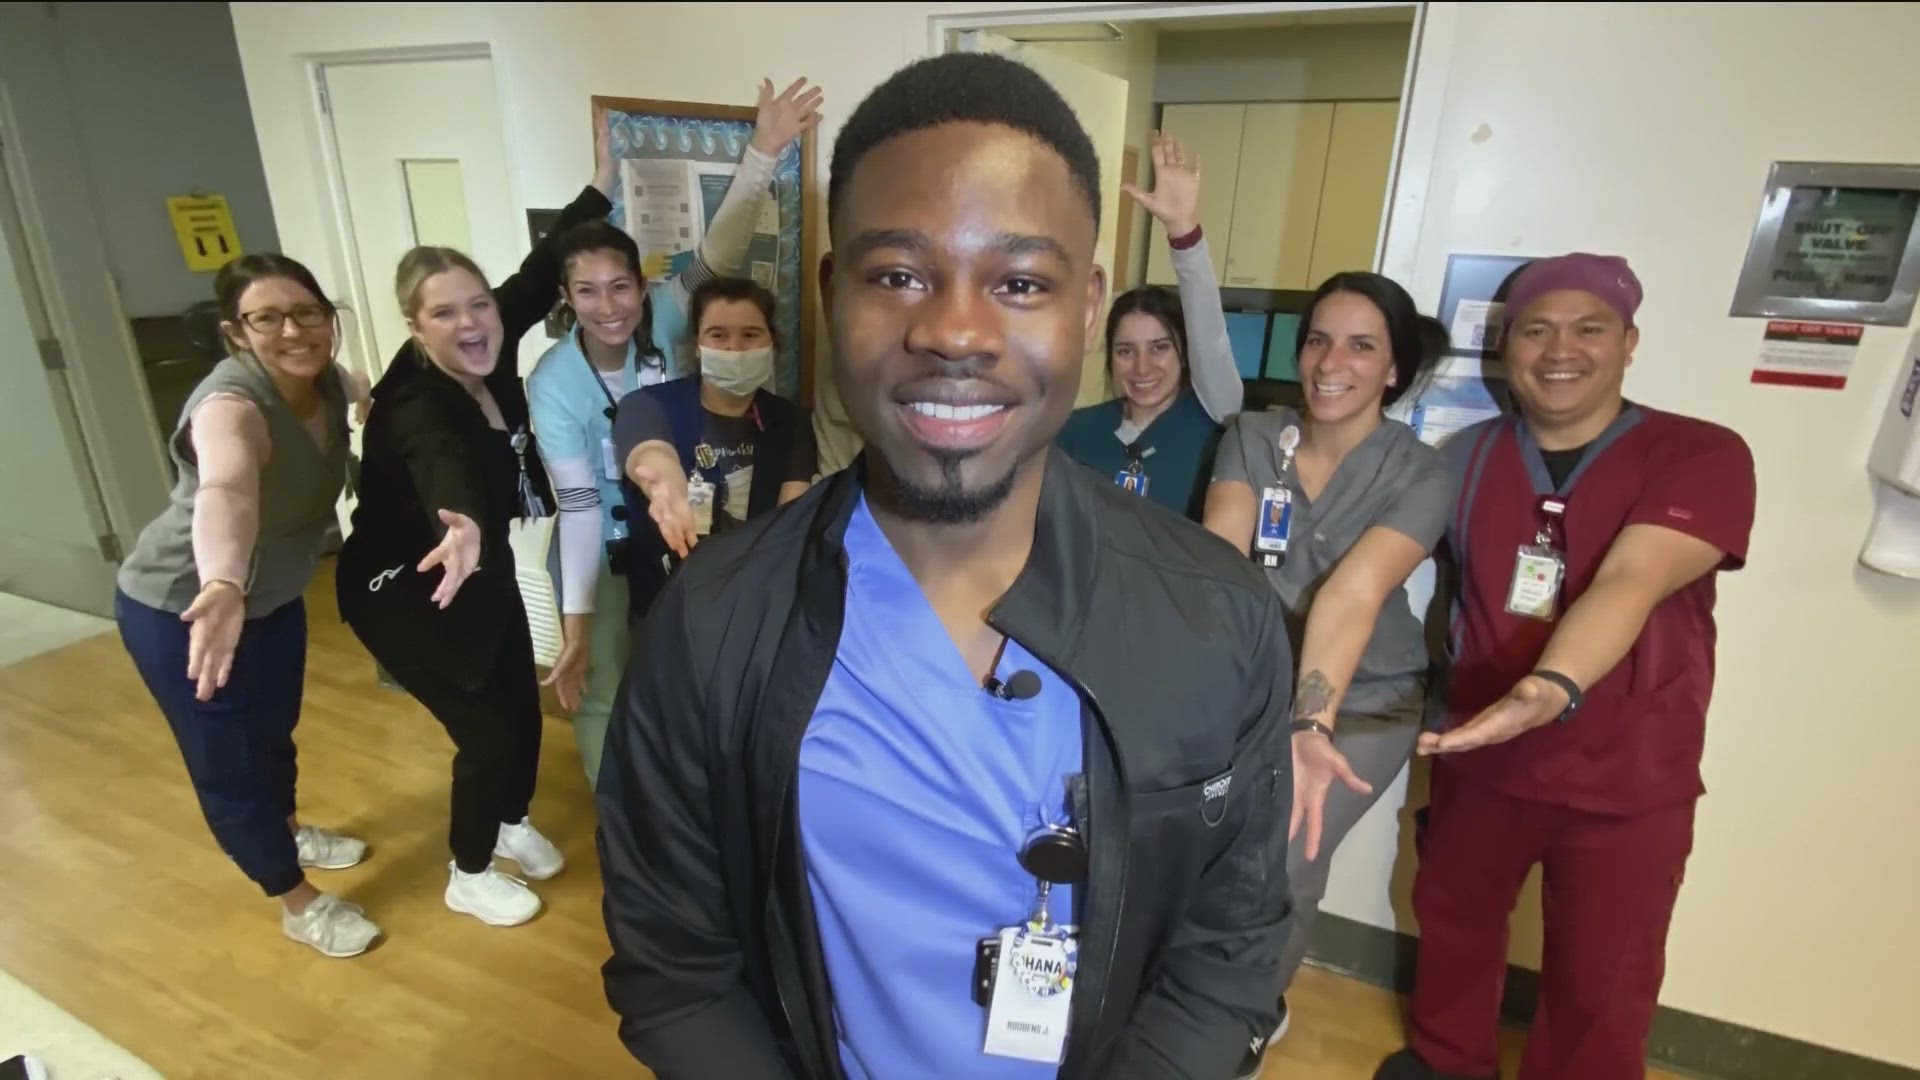 Roobens Joujoute is now a Registered Nurse at Scripps Health after healthcare provider helped his homeland.